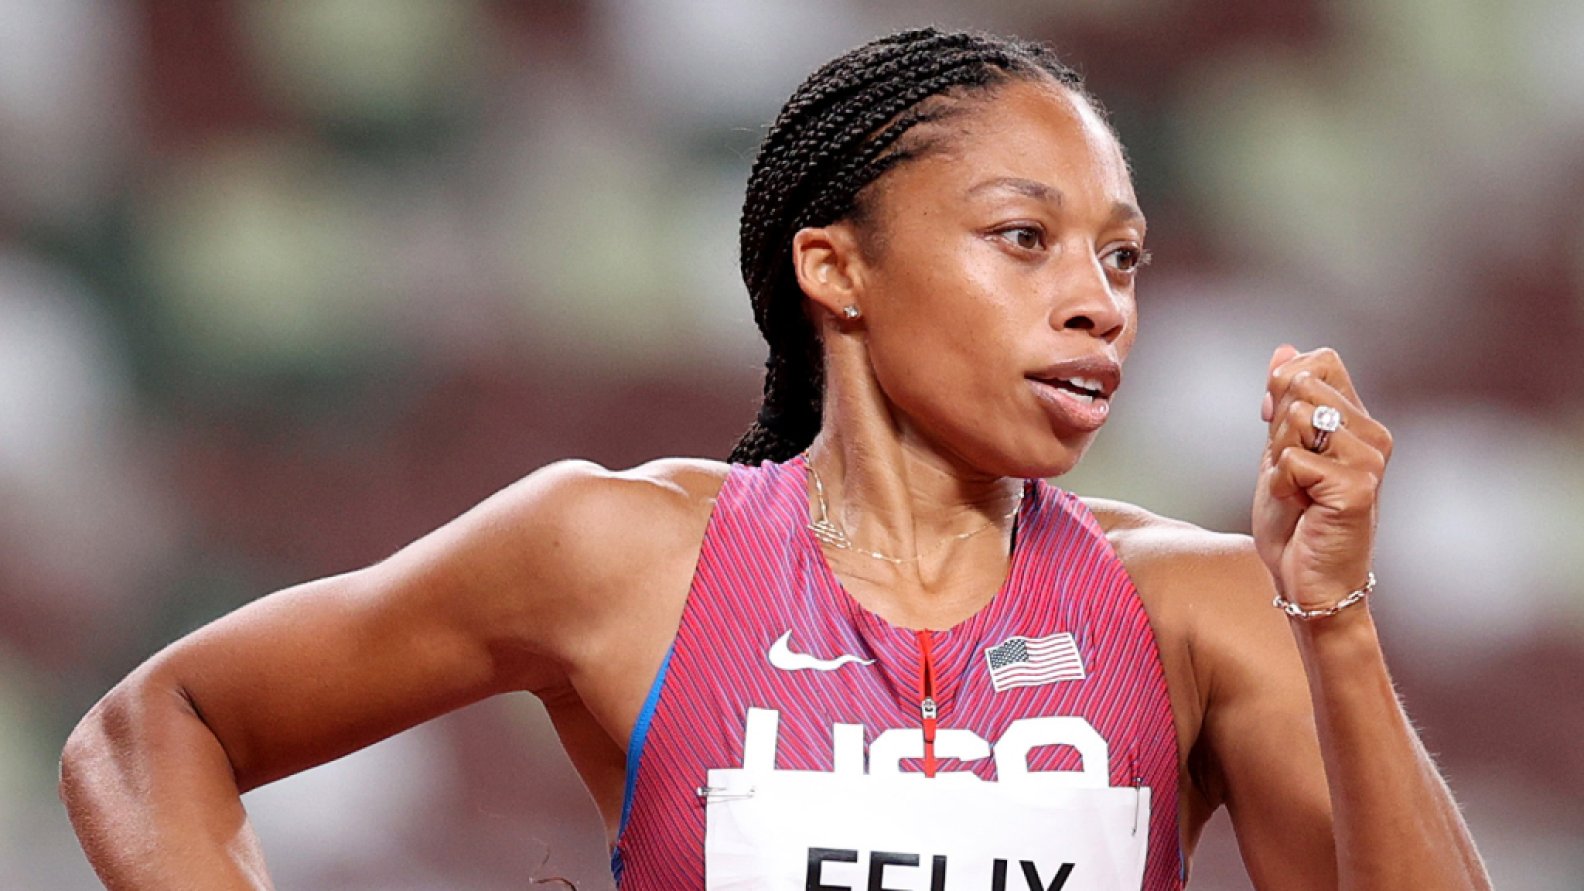 Allyson Felix of Team USA competes in the Women's 400m semifinal at the Tokyo Olympic Games at Olympic Stadium on Aug.4, 2021 in Tokyo, Japan.